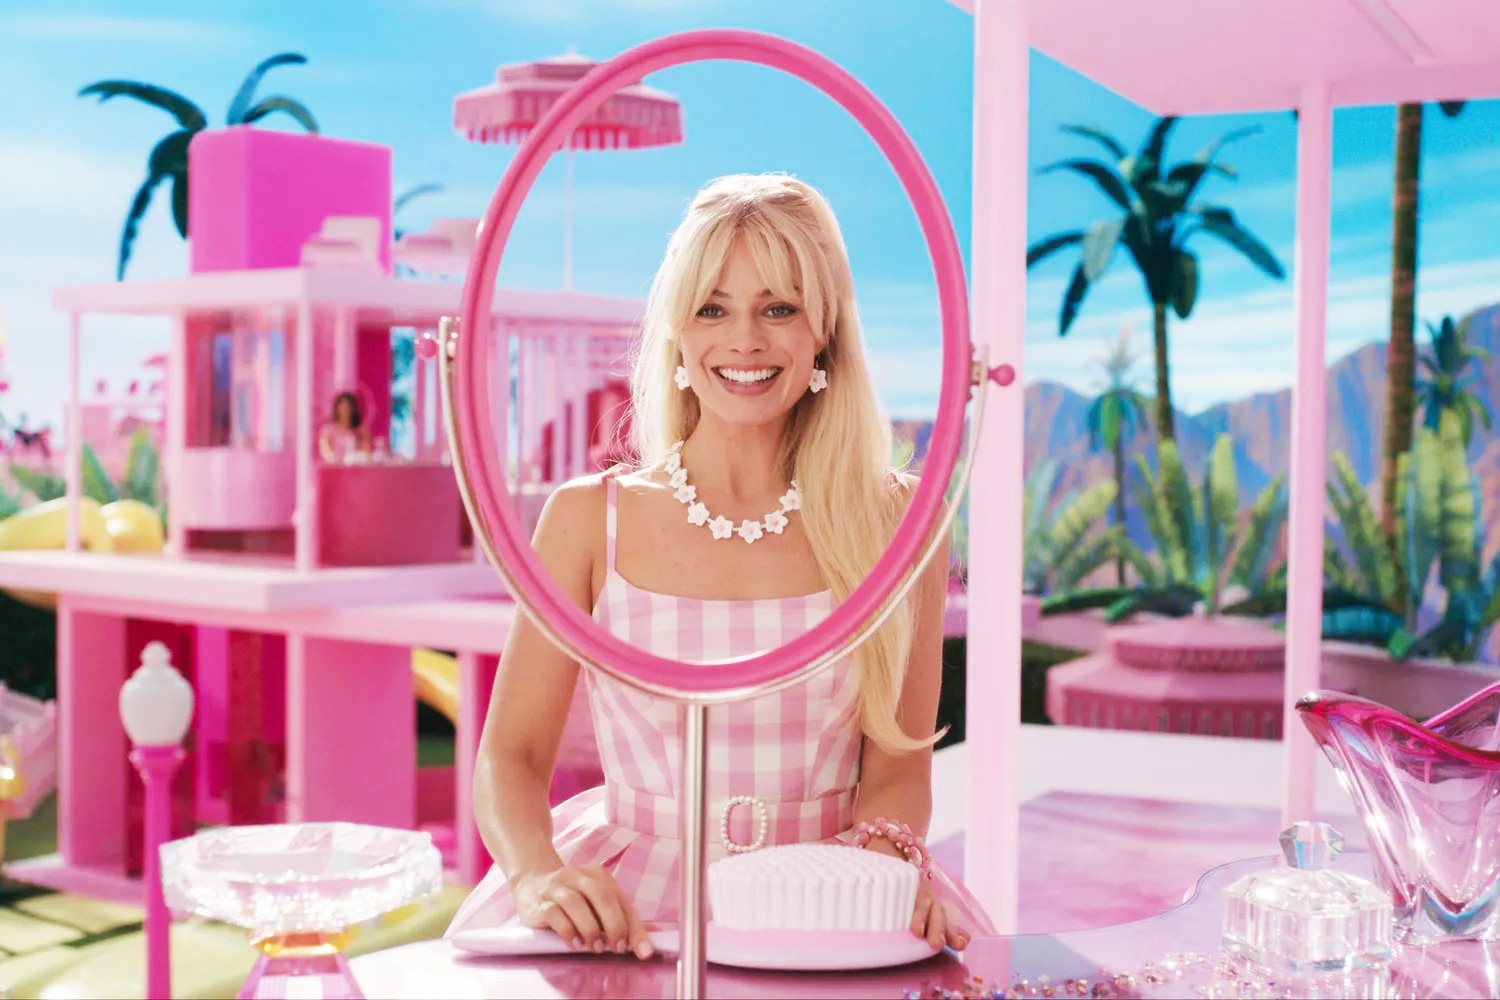 Is Your Home Ready for a Barbie Party? - Celebrity Angels